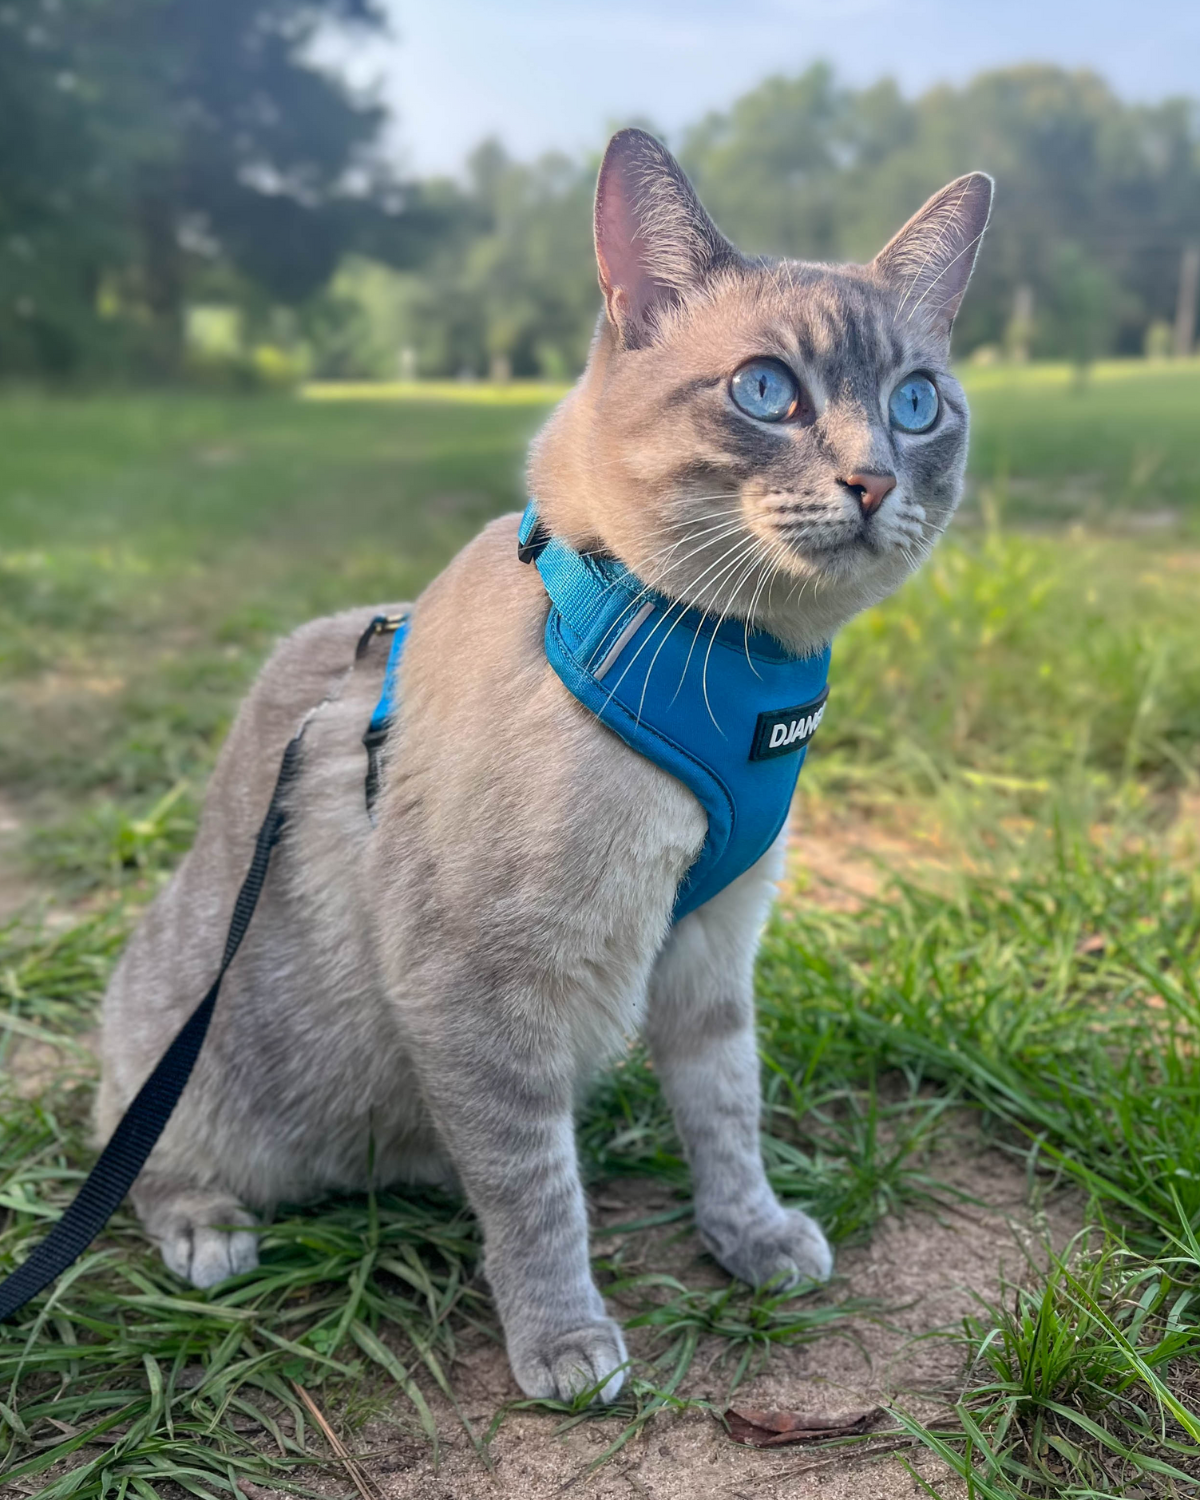 Cats love DJANGO's soft and padded harness body and the comfortable and lightweight design - djangobrand.com